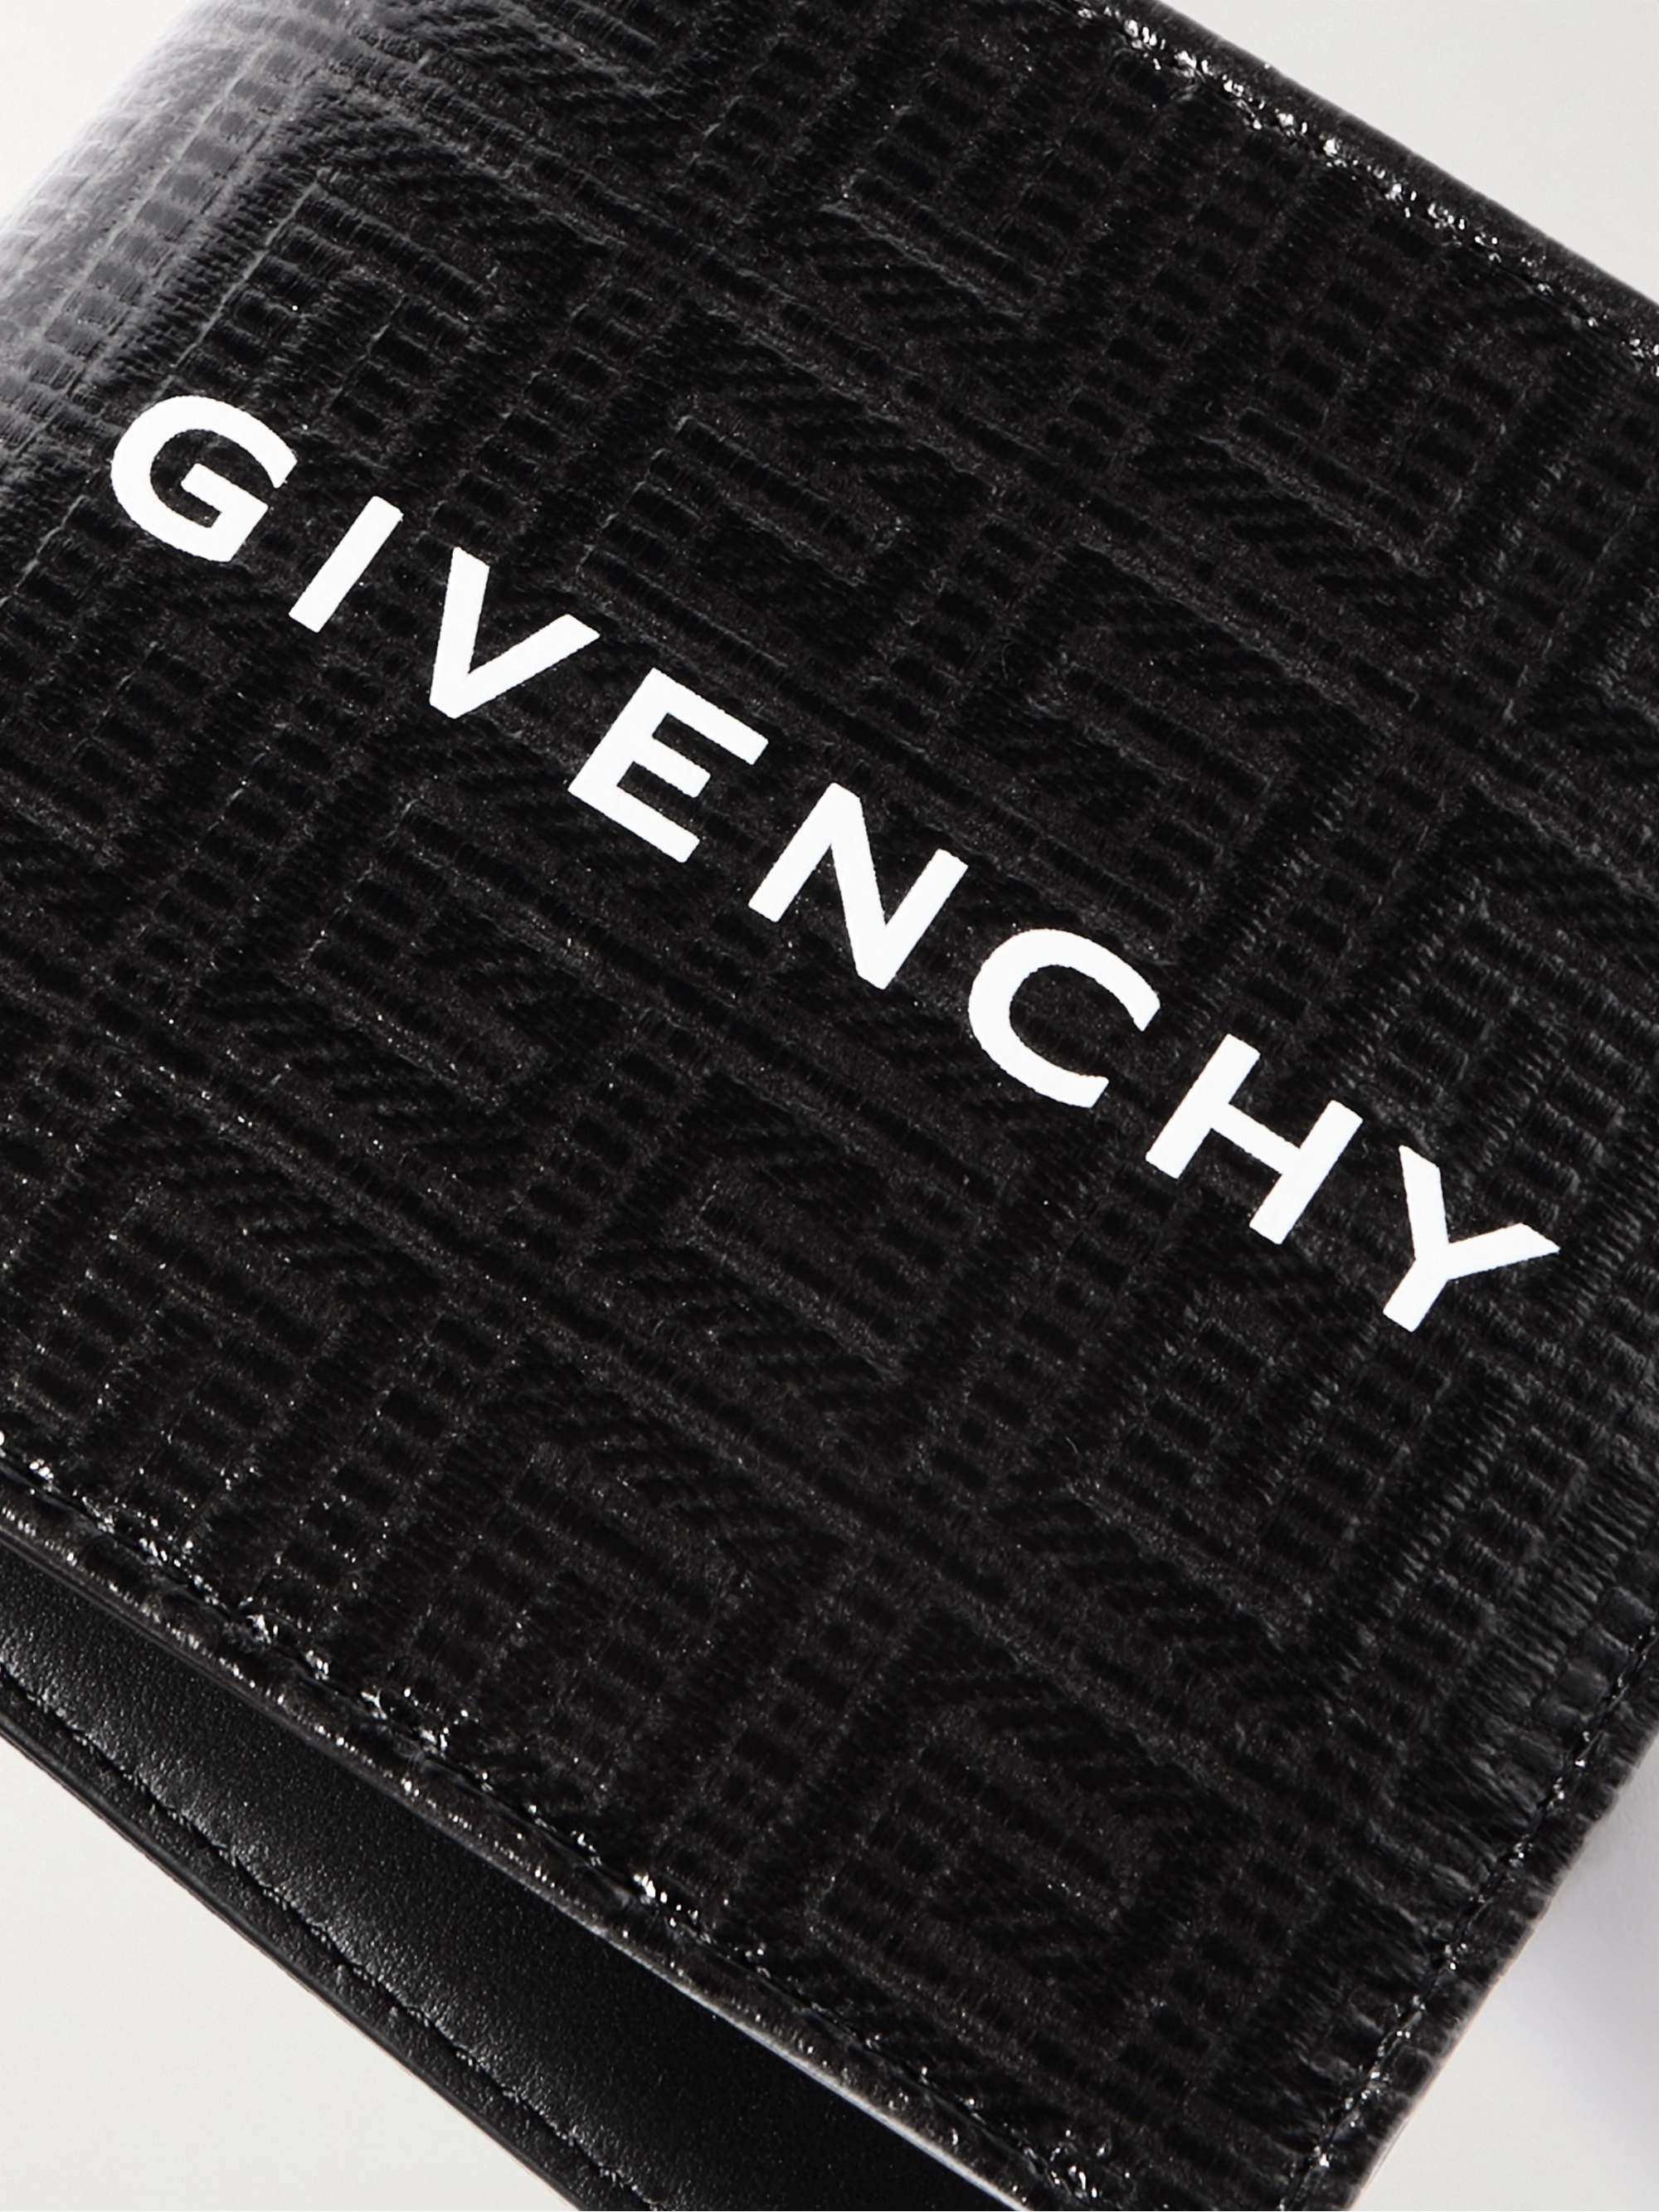 GIVENCHY Logo-Embossed Leather Billfold Wallet